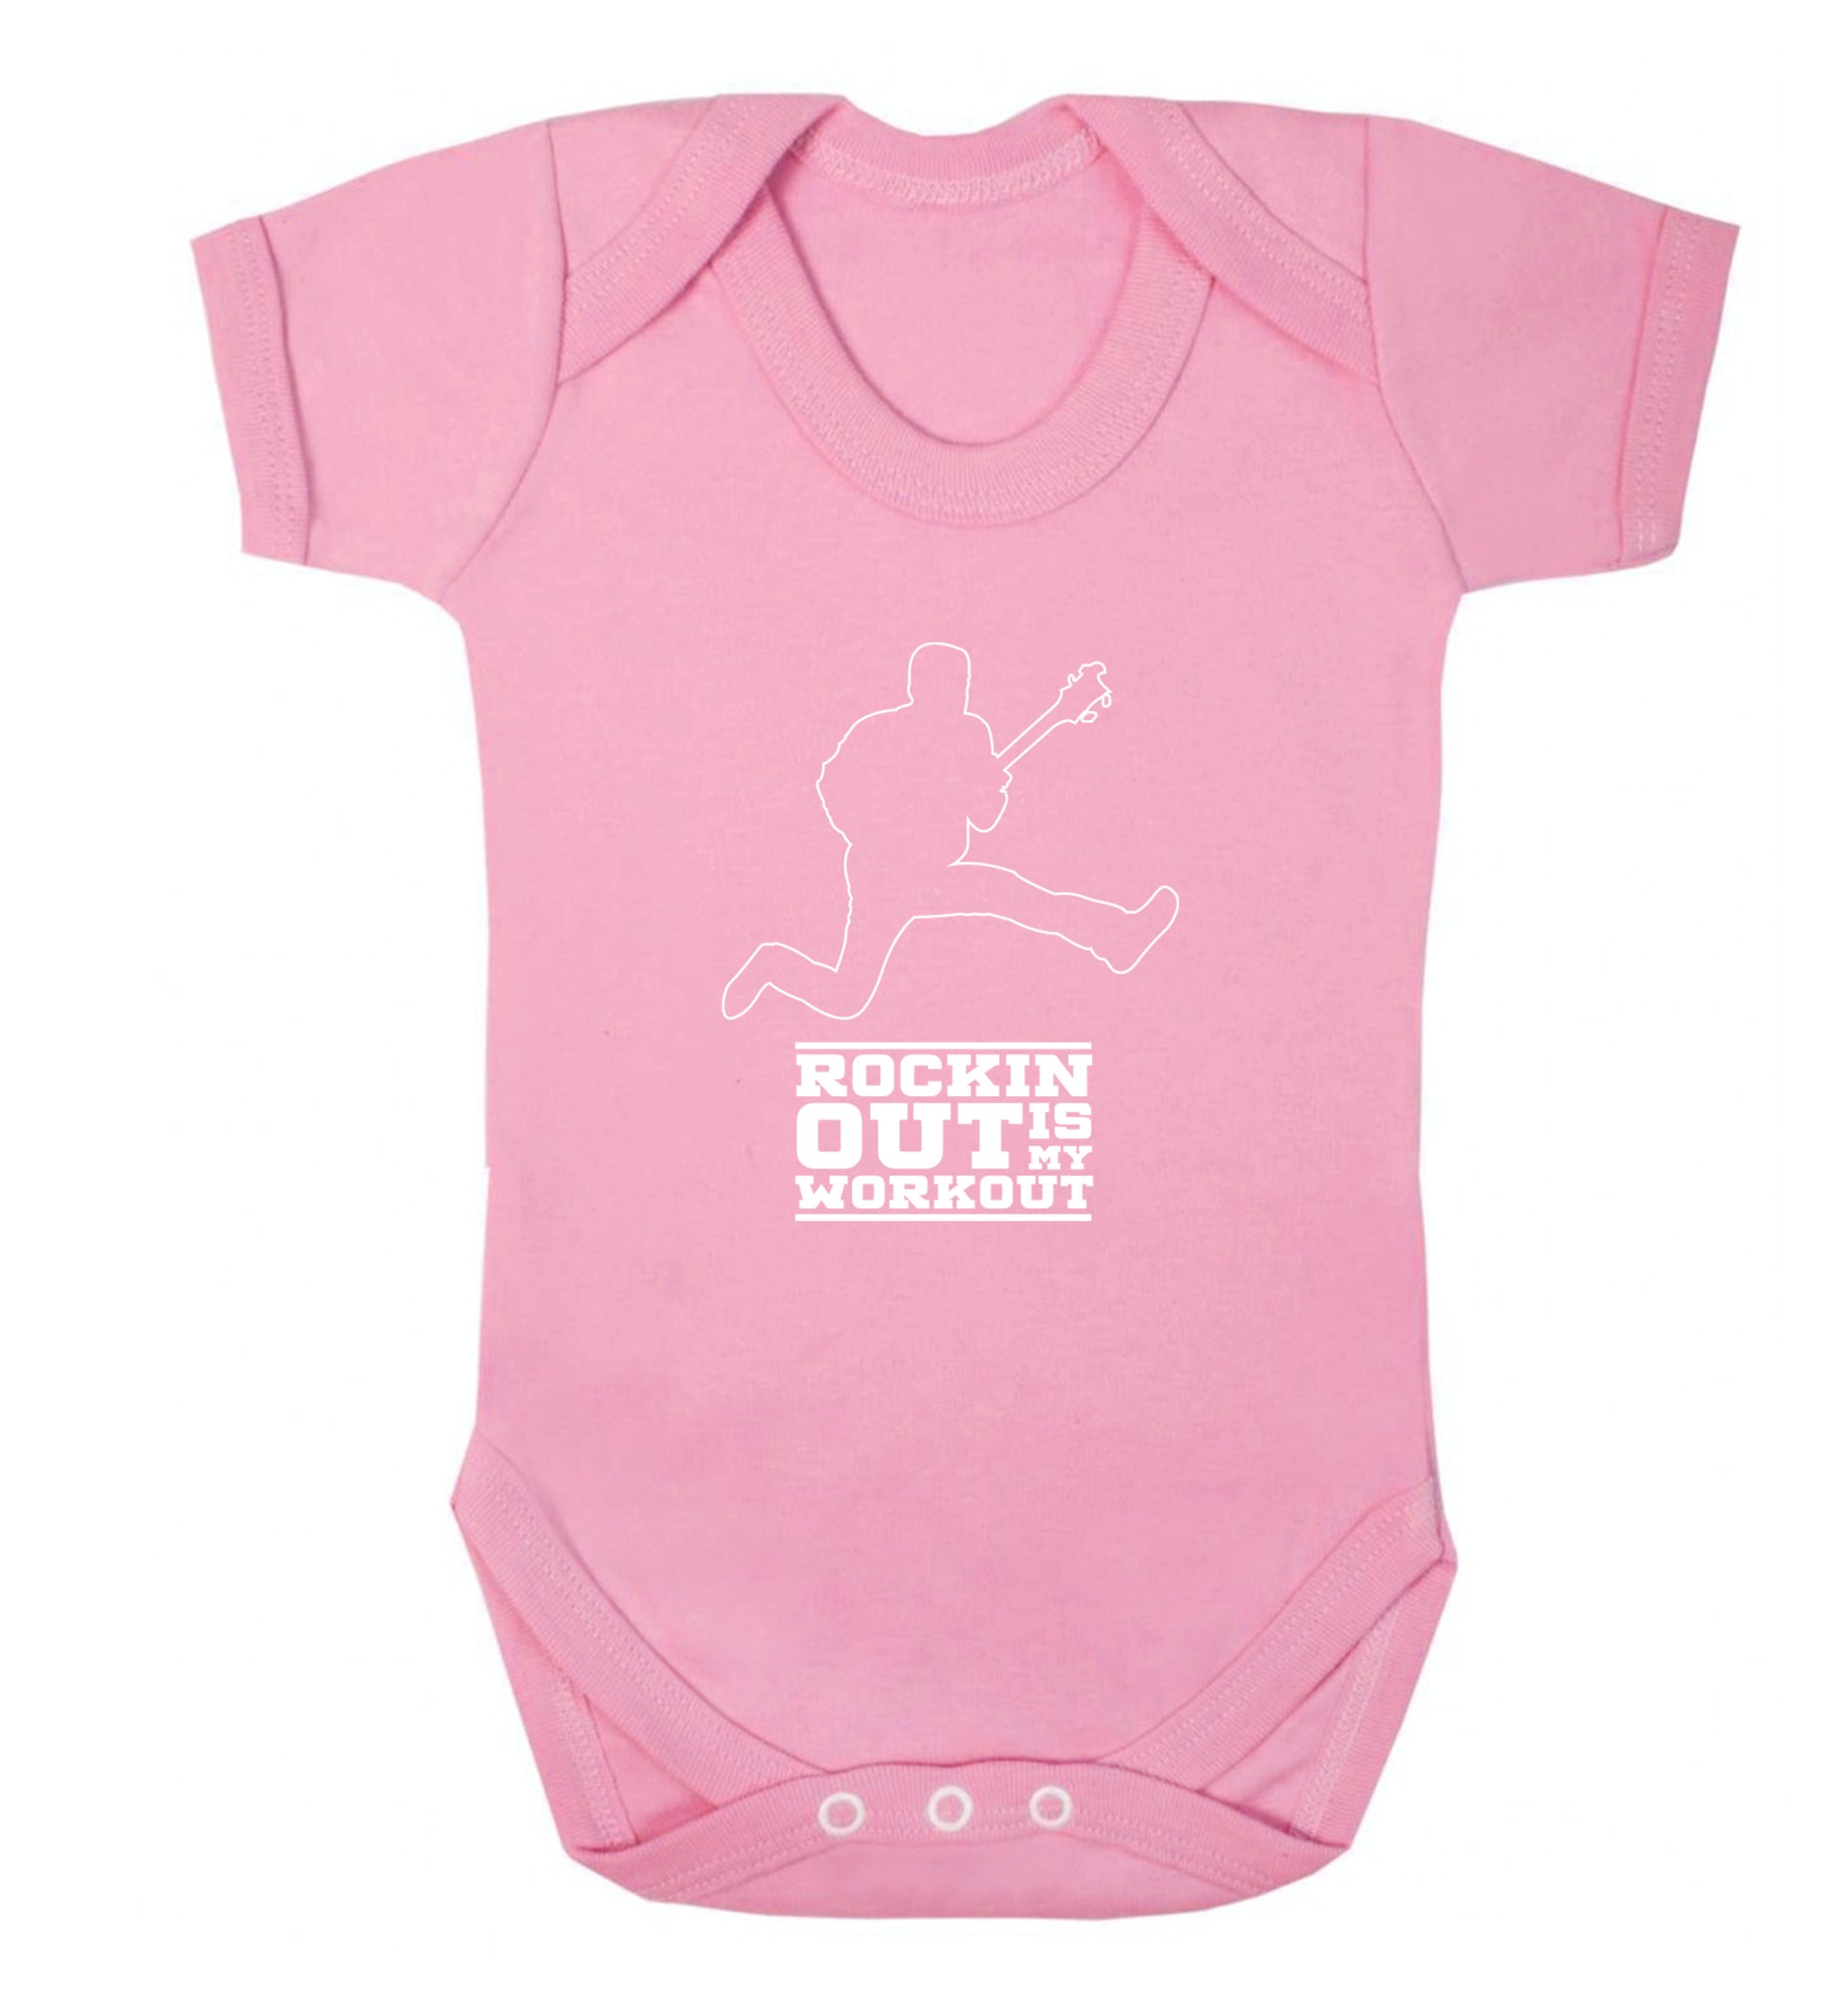 Rockin out is my workout 2 Baby Vest pale pink 18-24 months